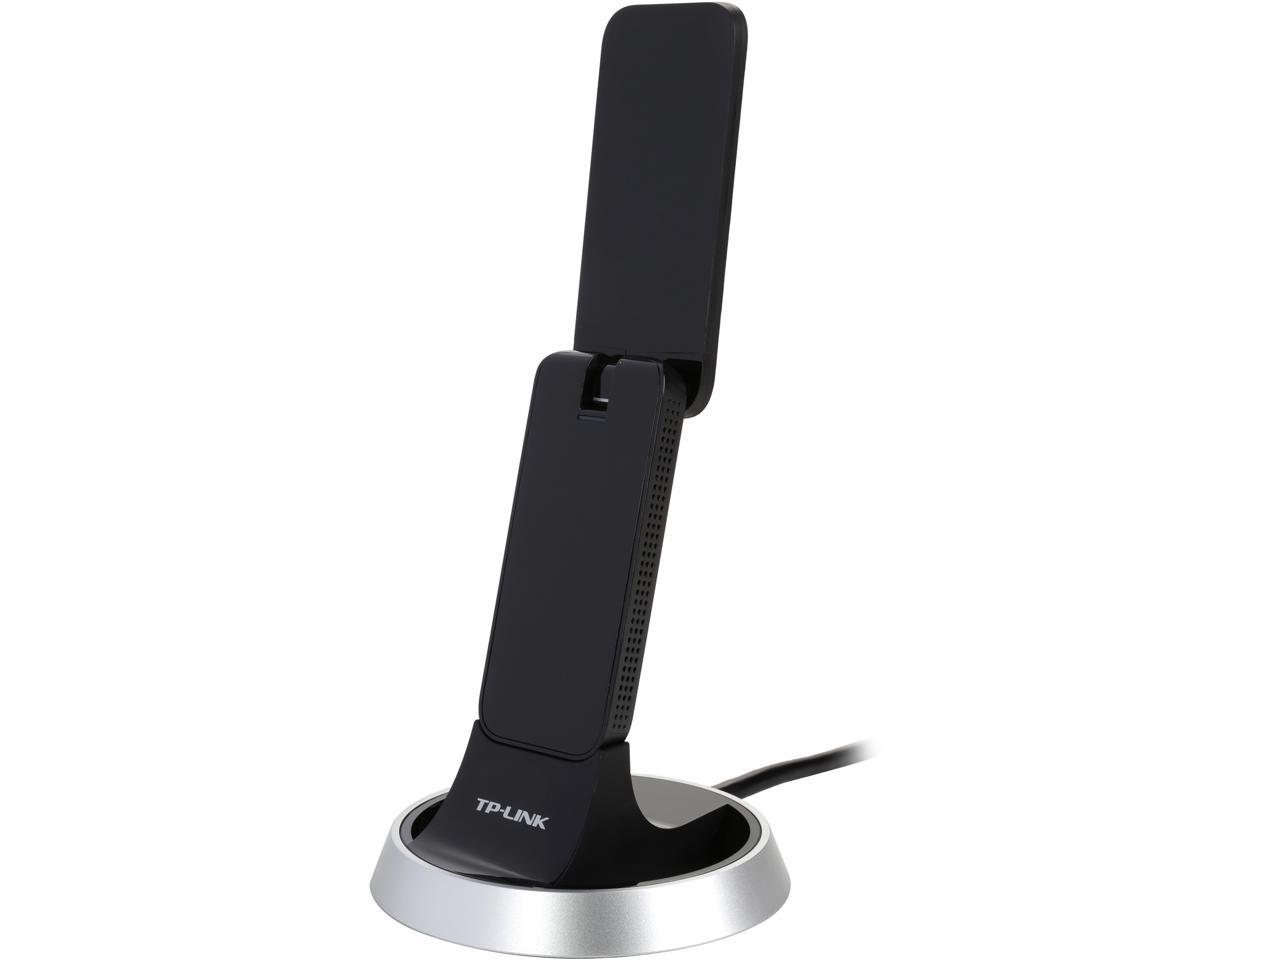 TP-LINK Archer T9UH AC1900 High Gain Wireless Dual Band USB Adapter ...